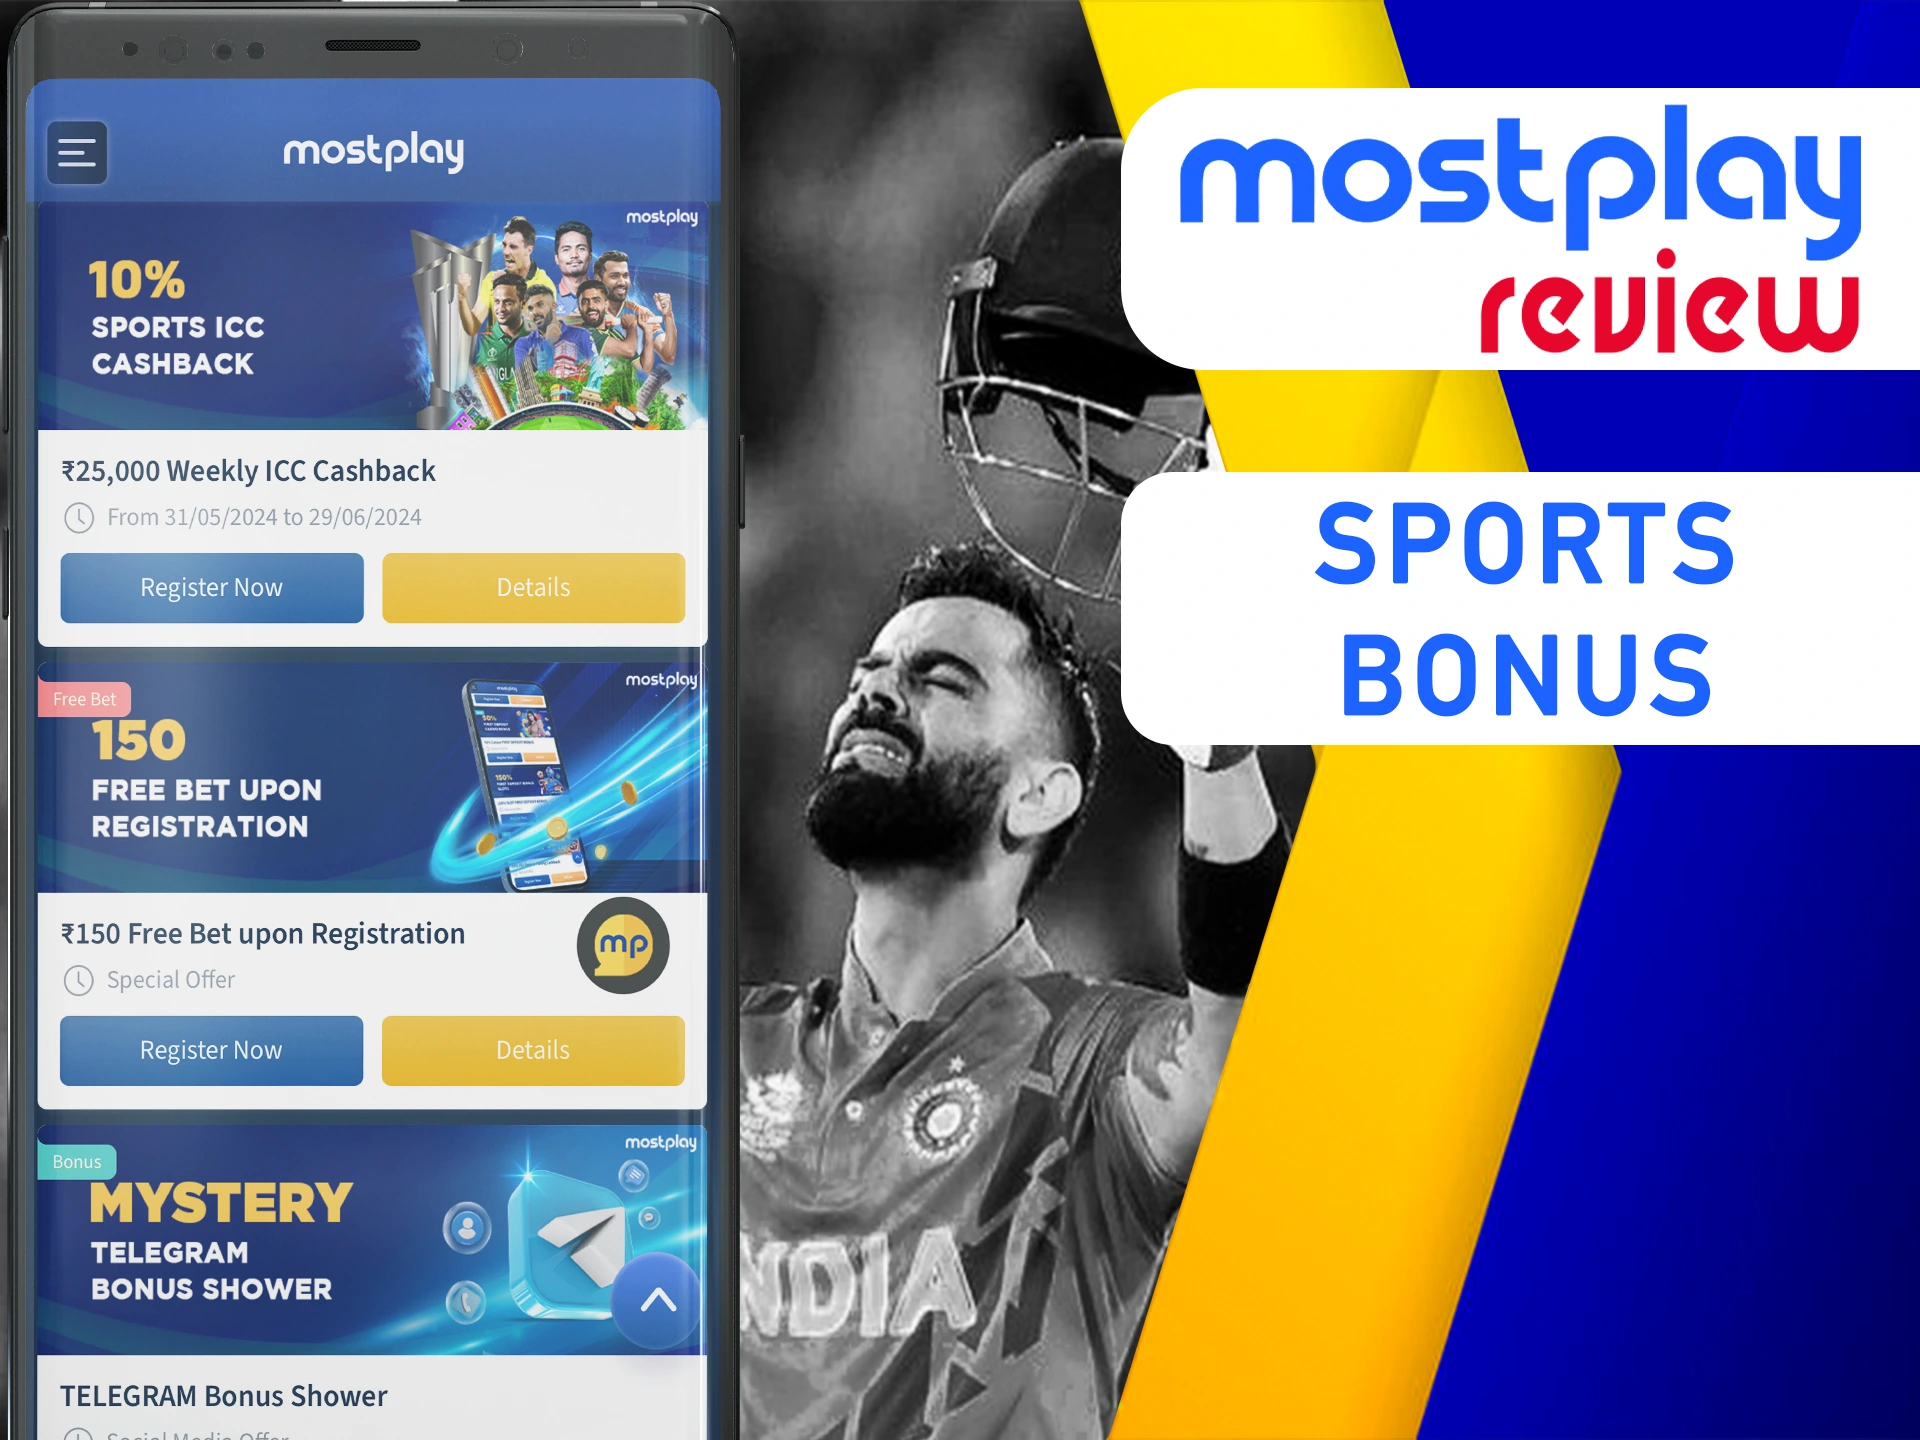 Get your Mostplay sports bonus by betting on sports.